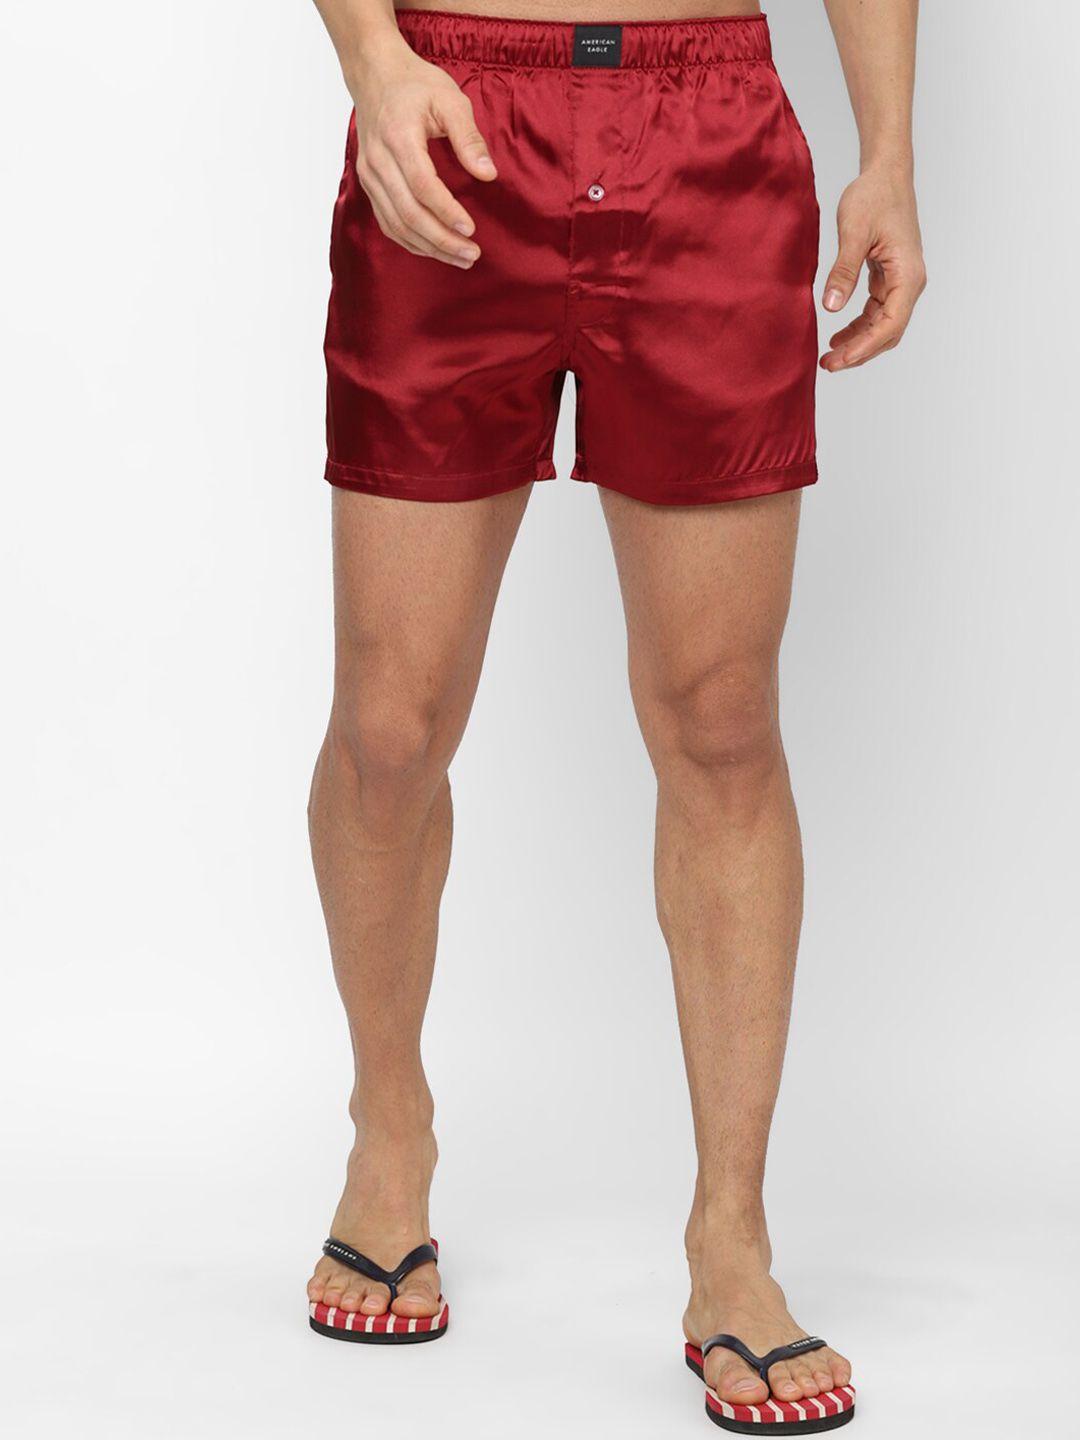 american-eagle-outfitters-men-inner-elastic-knitted-boxer